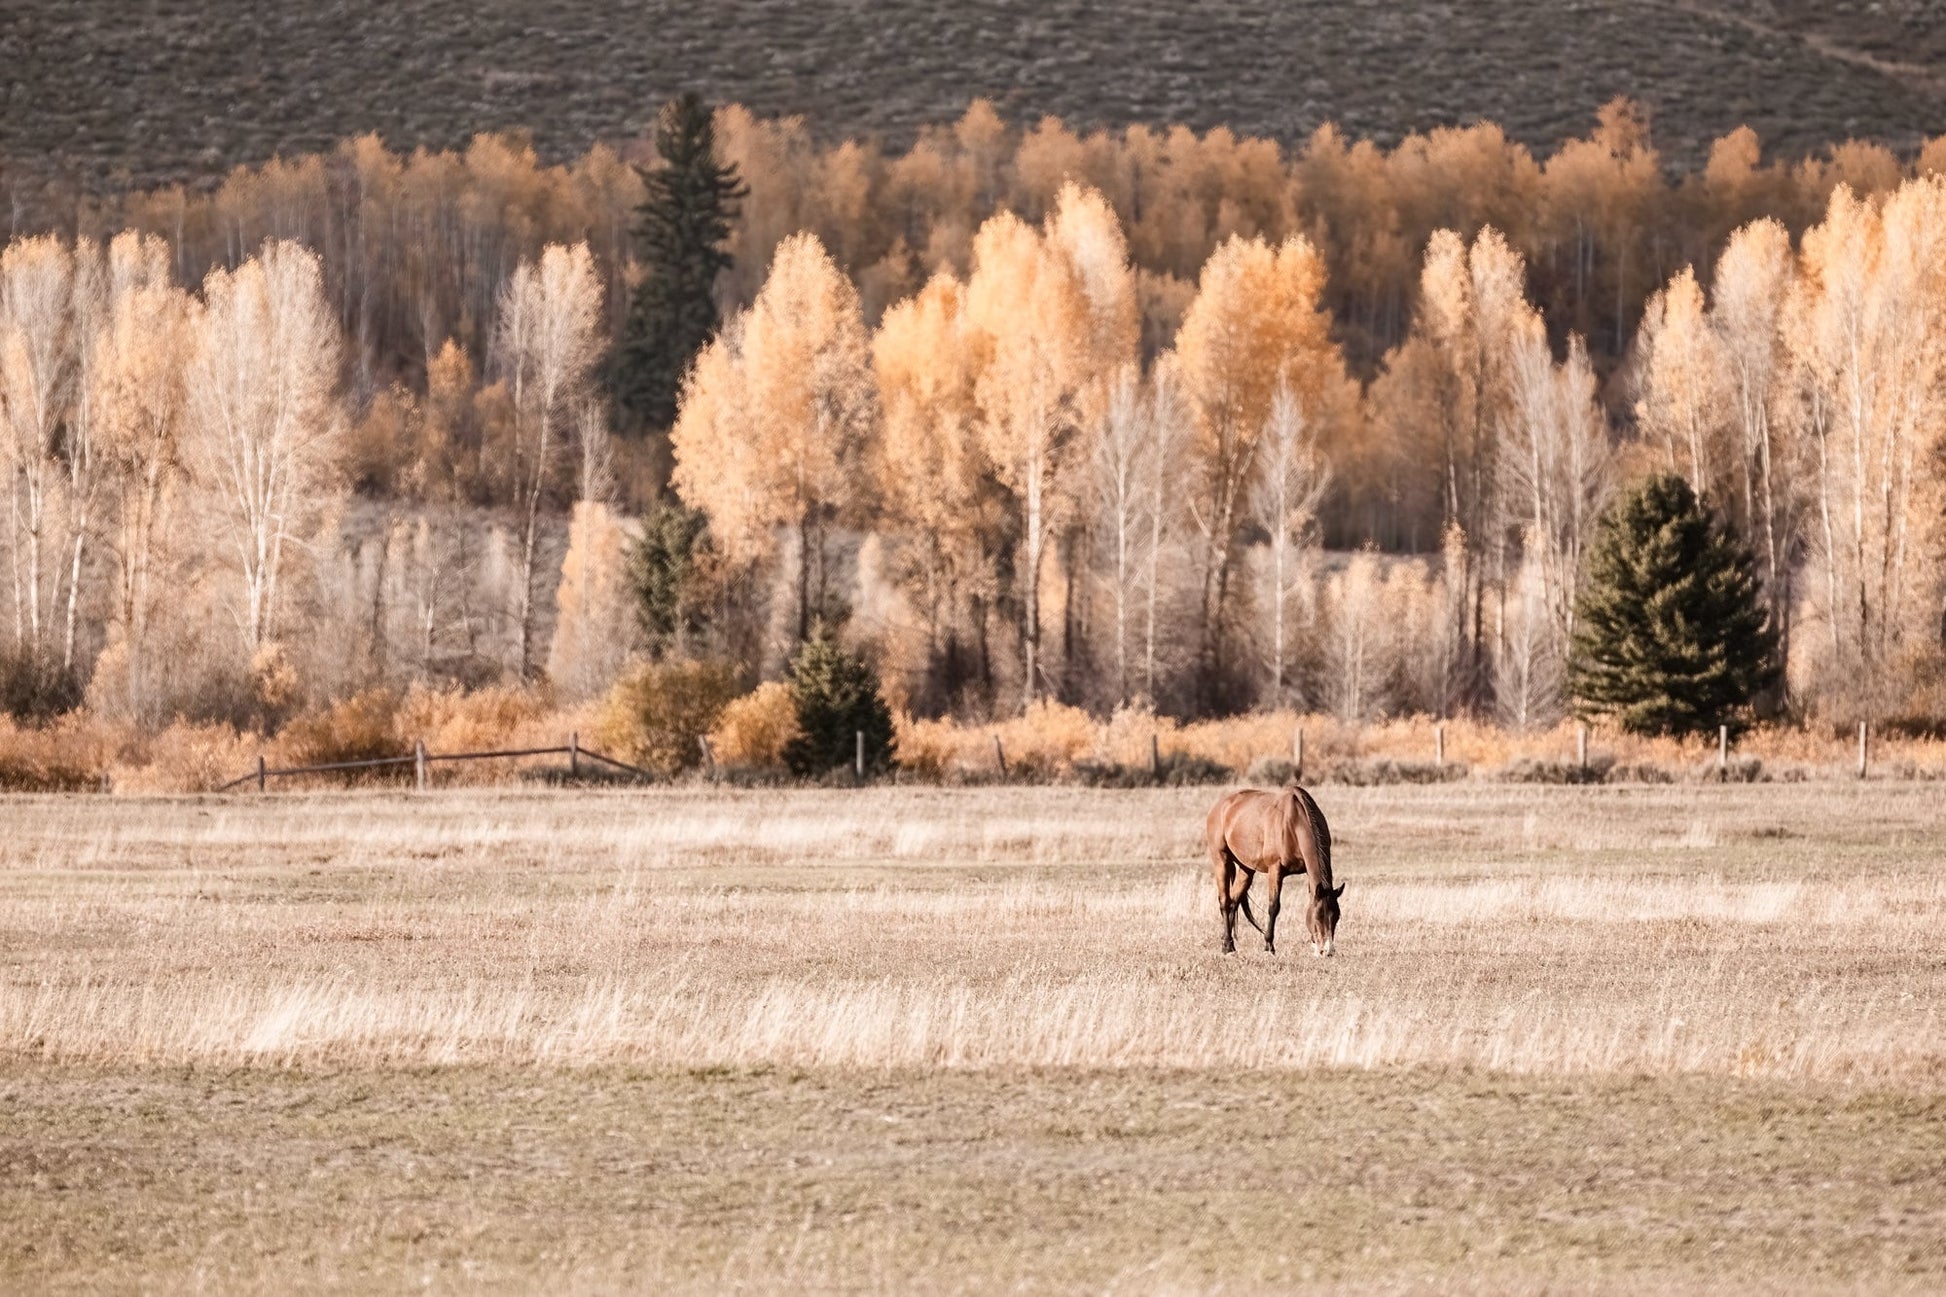 Teri James Photography Wall Art Paper Photo Print / 12 x 18 Inches Horse Art - Lone Horse and Fall Trees